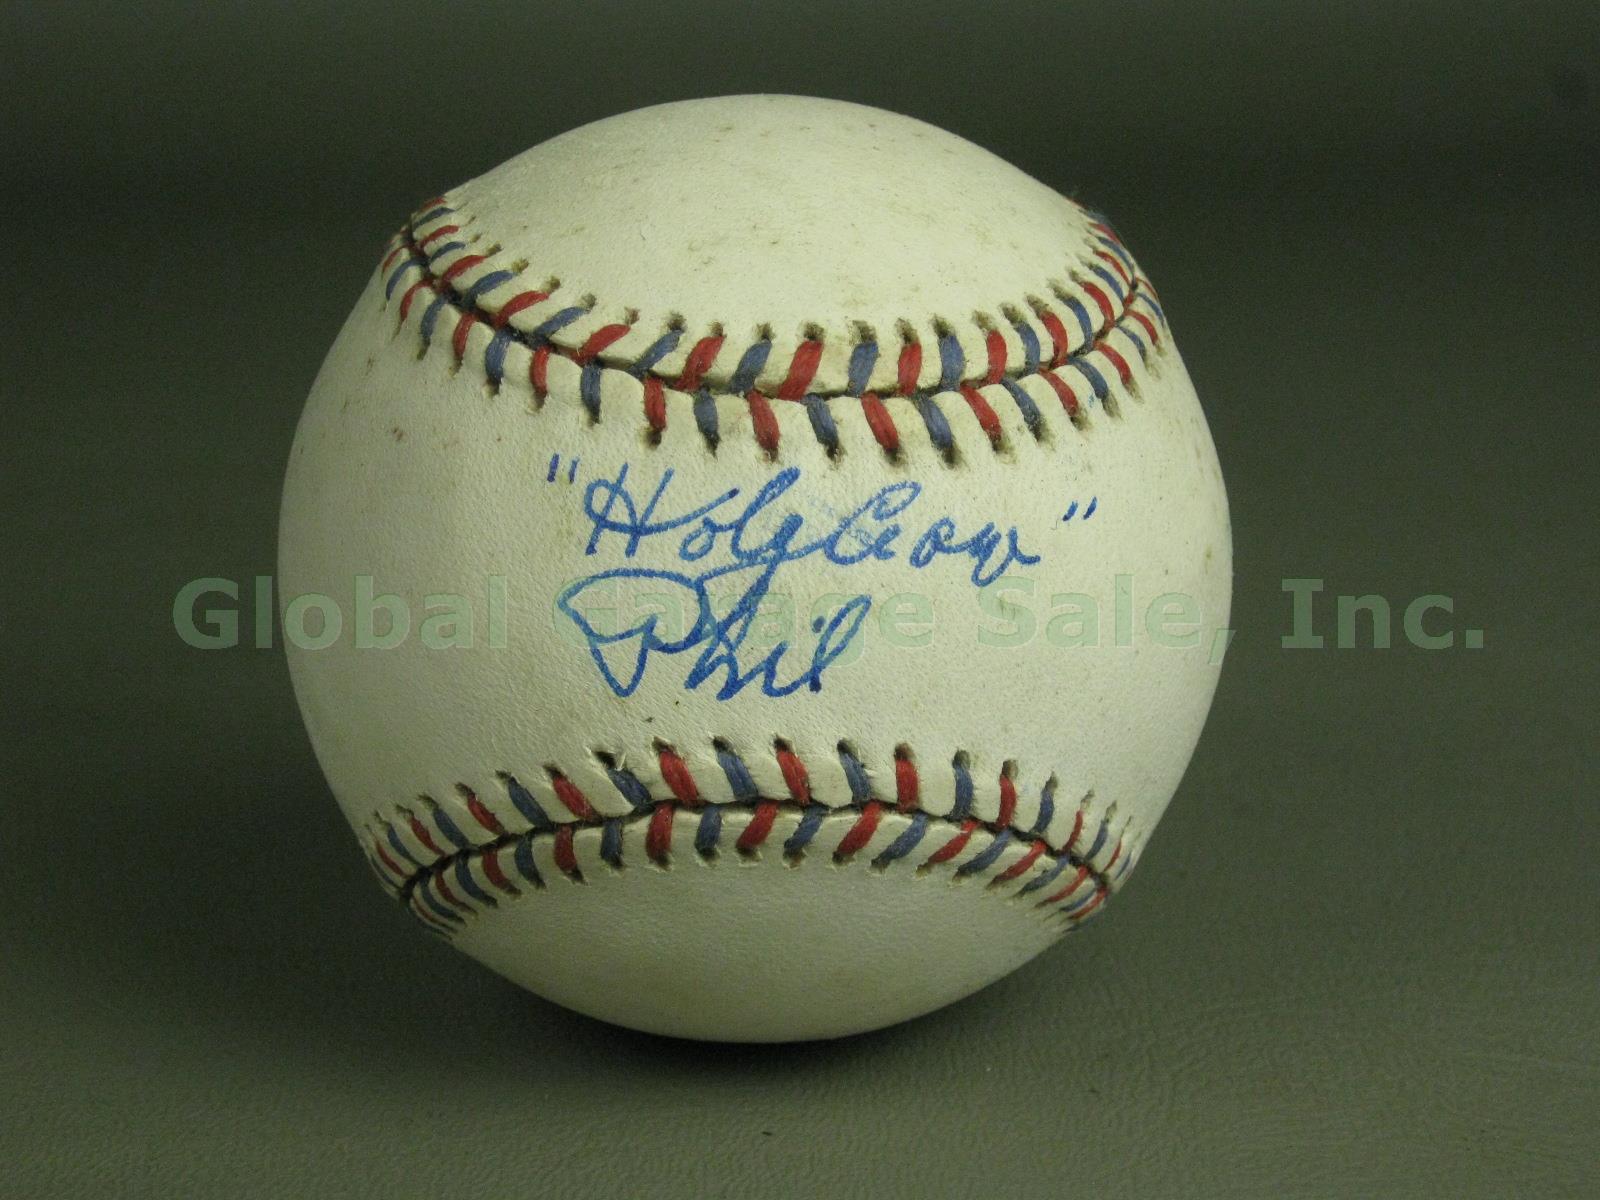 2 Signed Baseballs Phil Holy Cow Rizutto Reggie Jackson NY Yankees Hall Of Fame 1